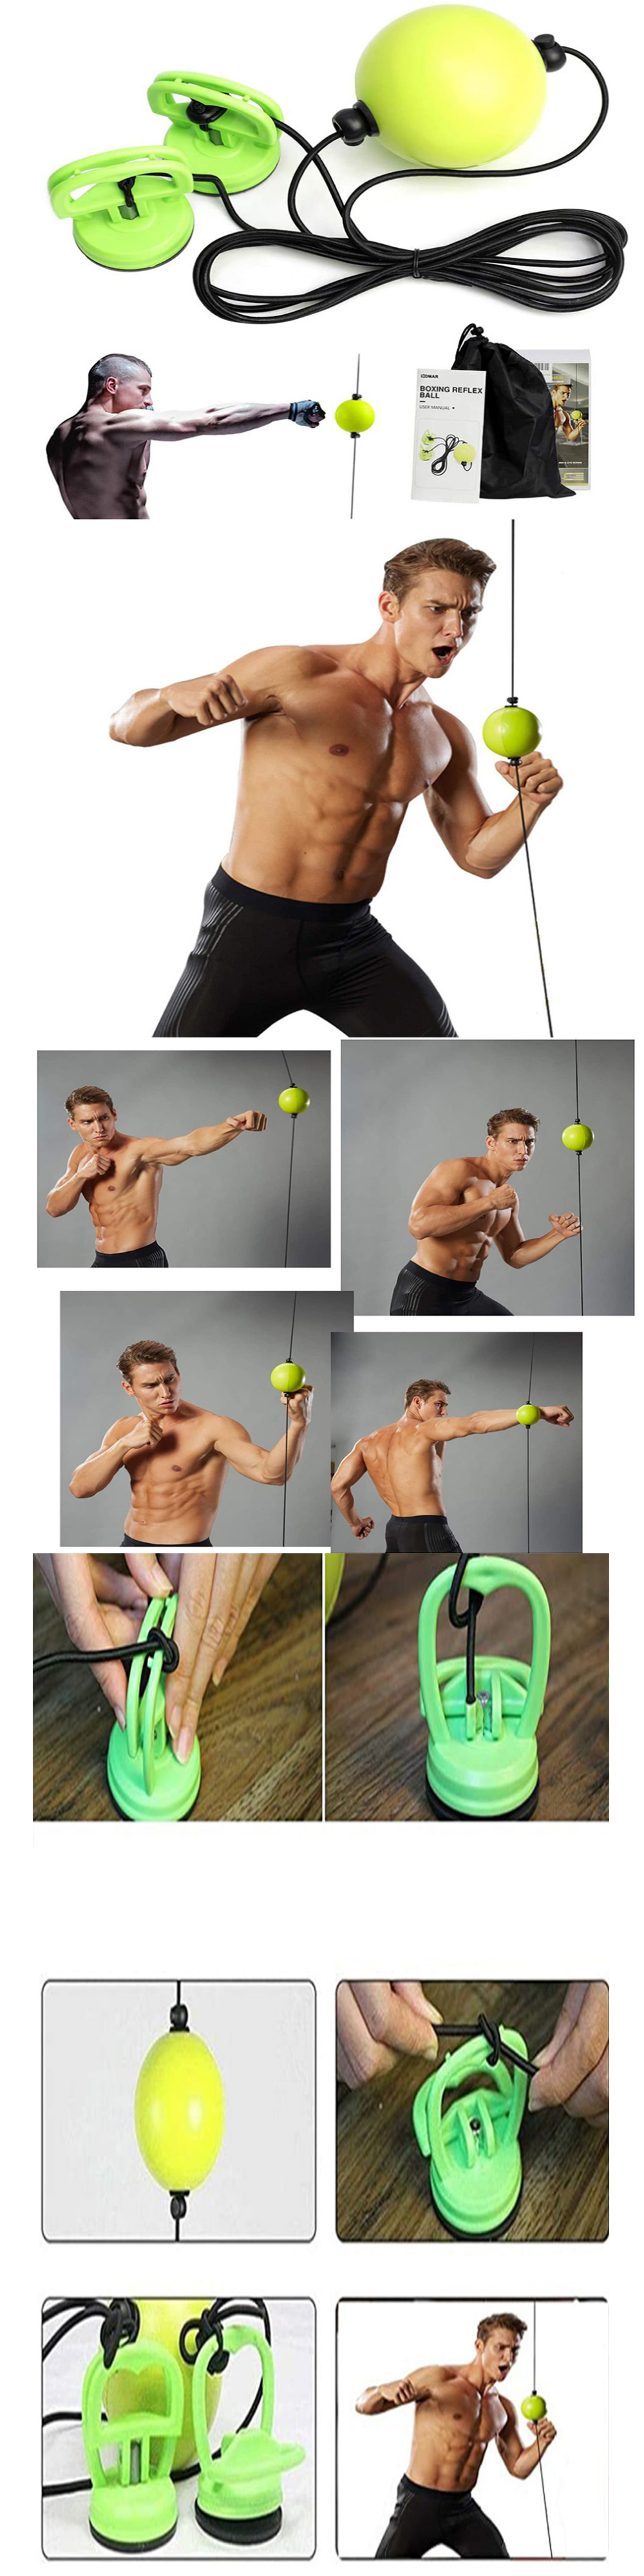 KALOAD-10CM-Adjustable-Suction-Cup-Suspension-Boxing-Ball-Suspension-Combat-Ball-Fitness-Physical-Tr-1836460-1